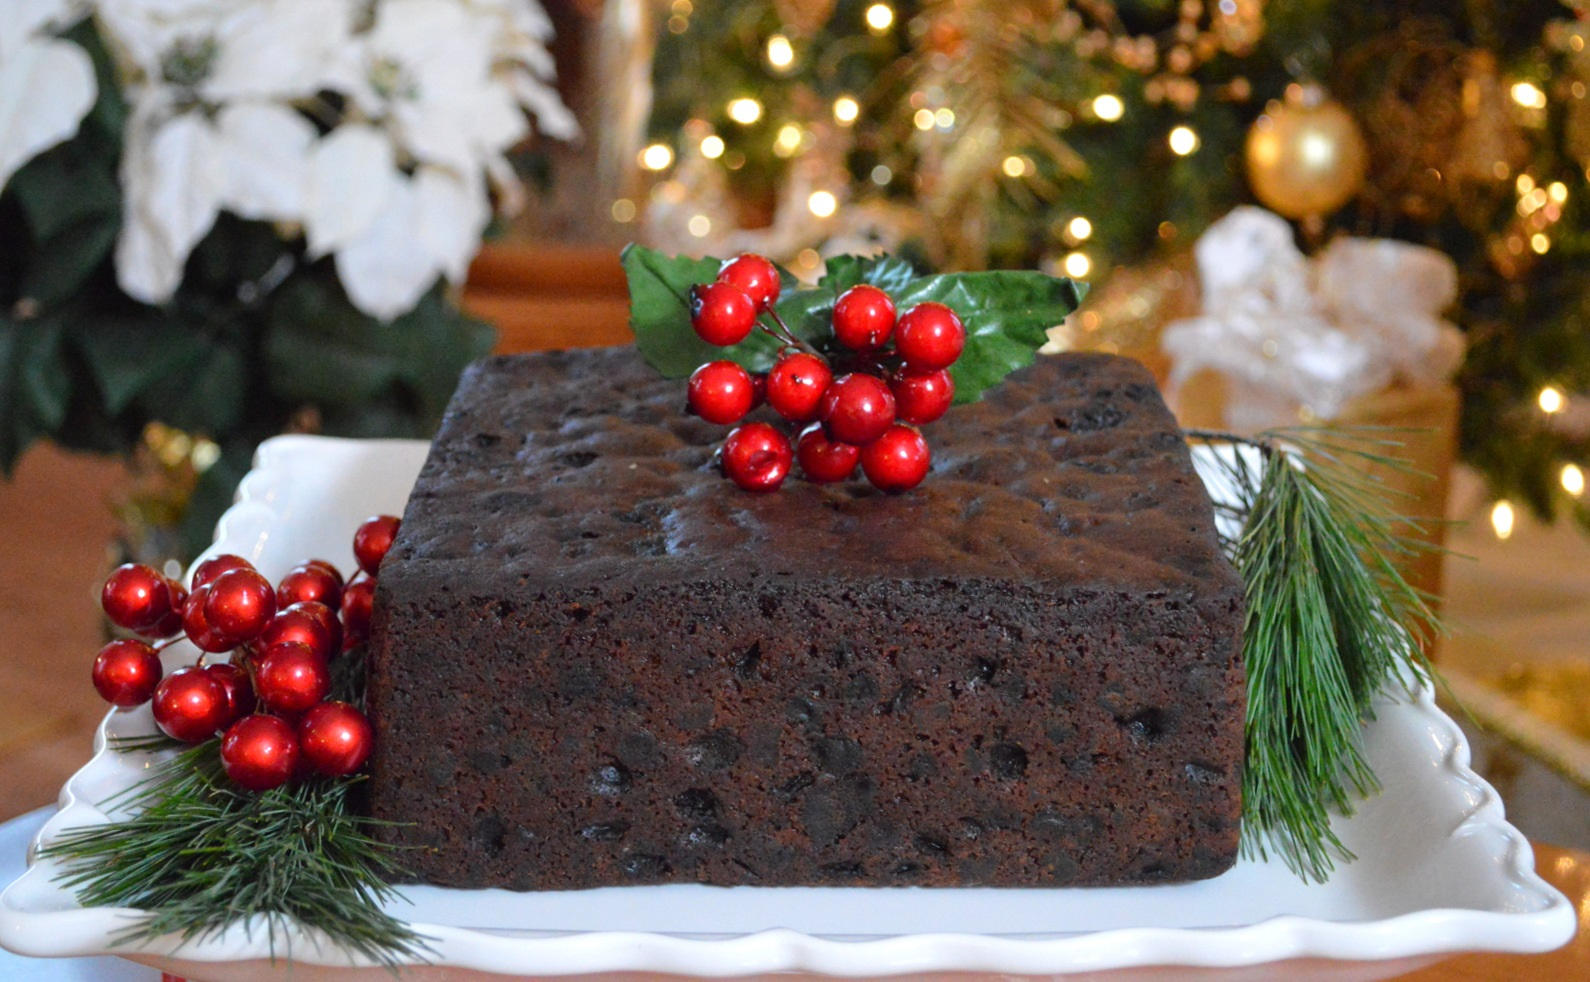 Learn The Easy Recipe of Christmas Fruit Cake - Ferns N Petals